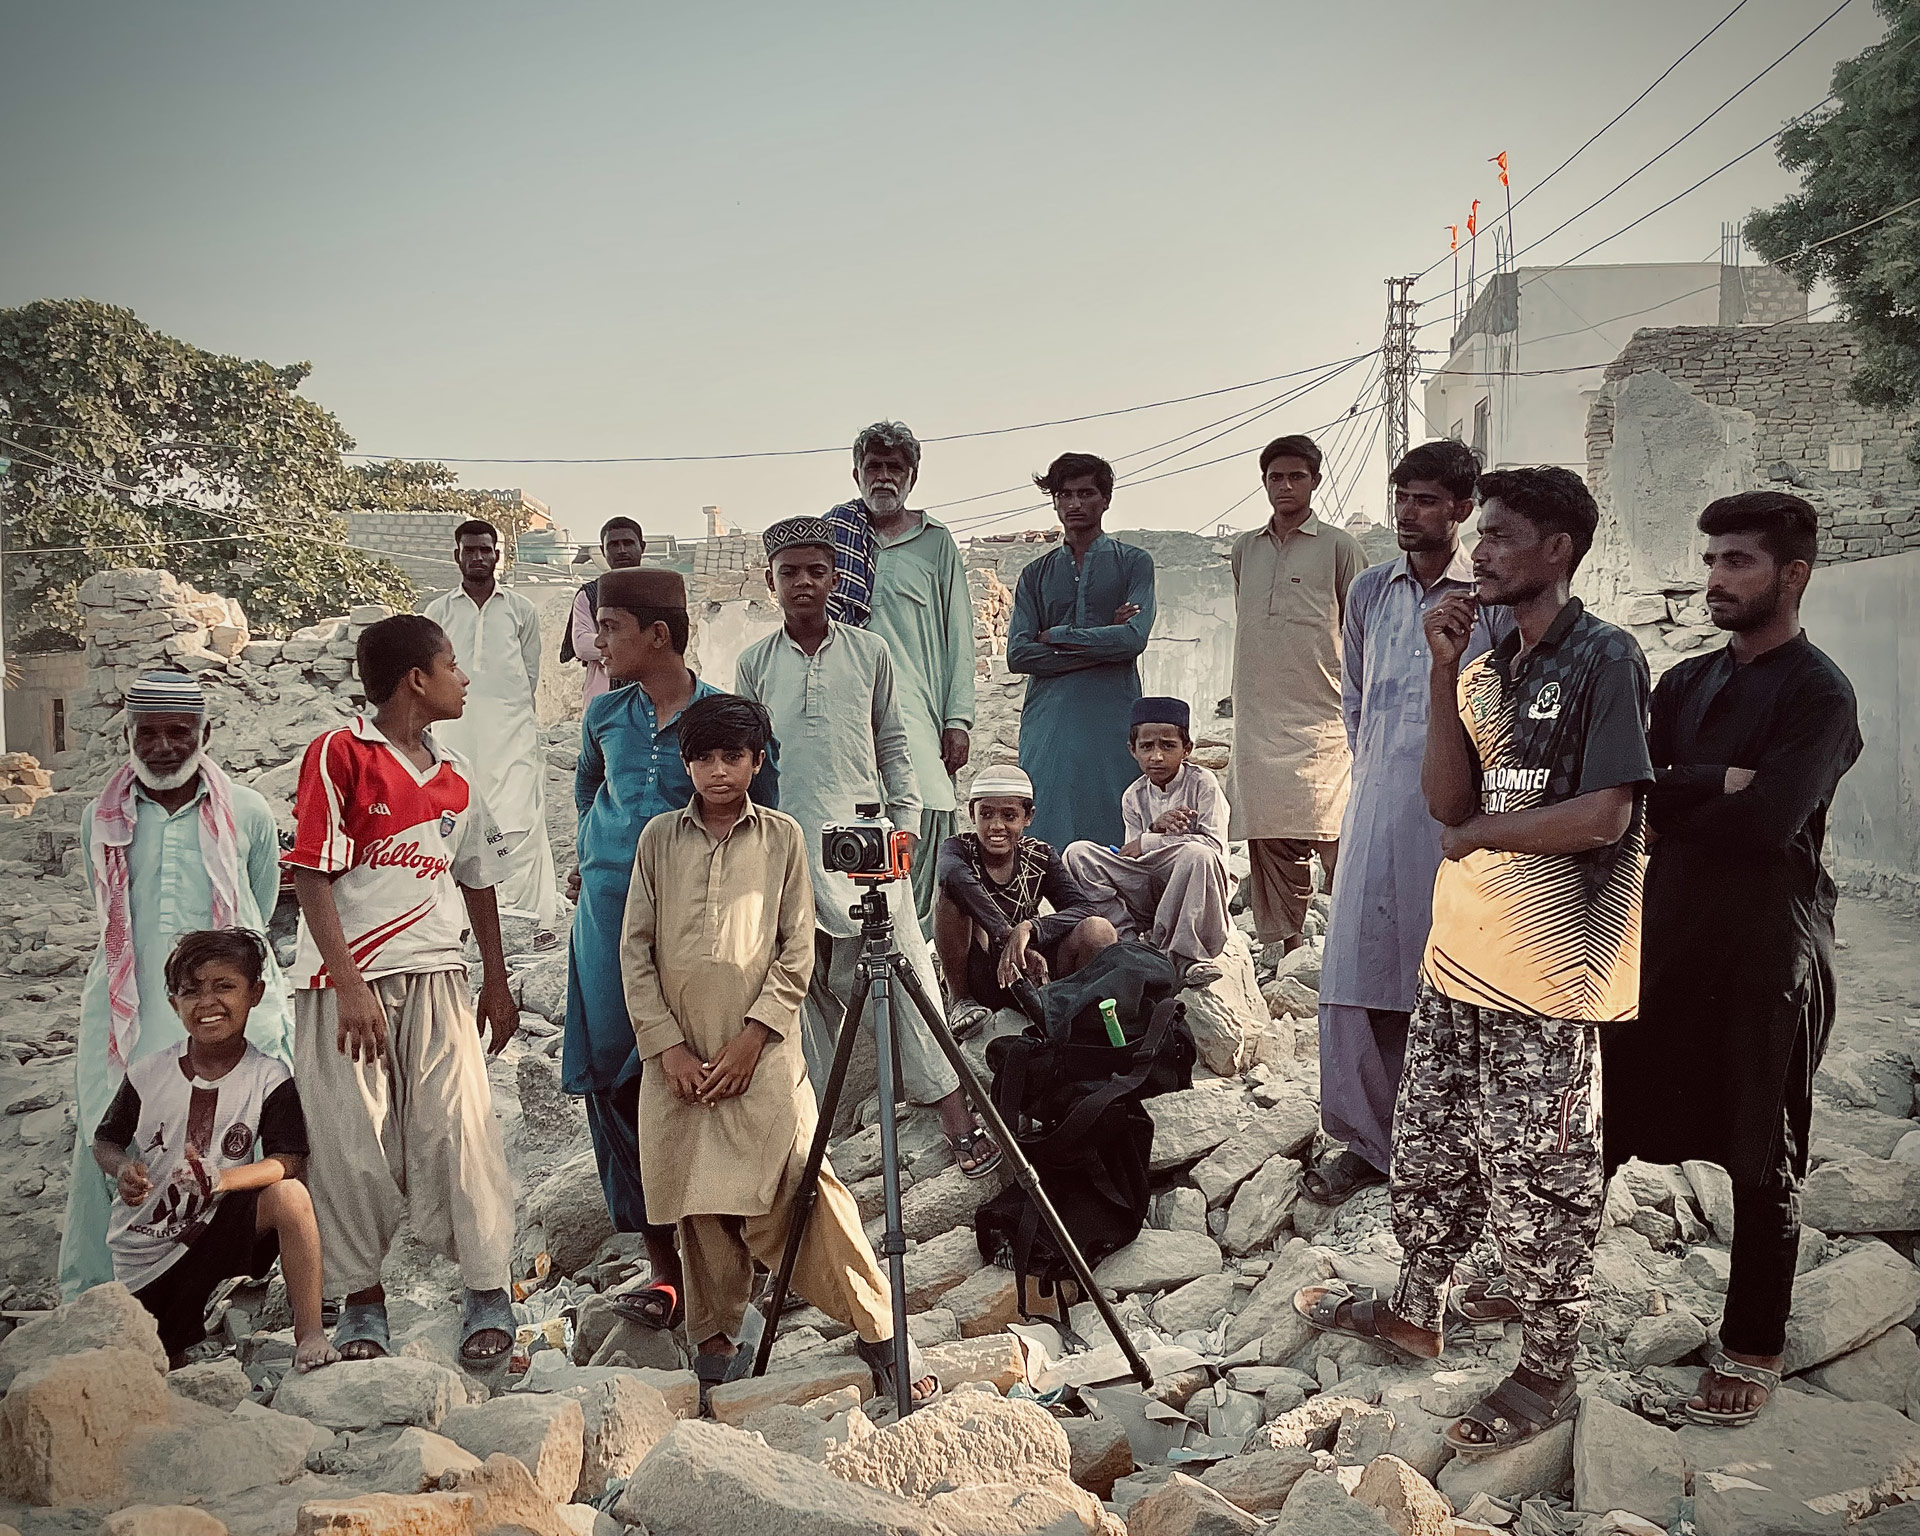 A group of men and boys are standing in what looks like a ruined house, under a blue sky, with a camera on a tripod in front of them. 